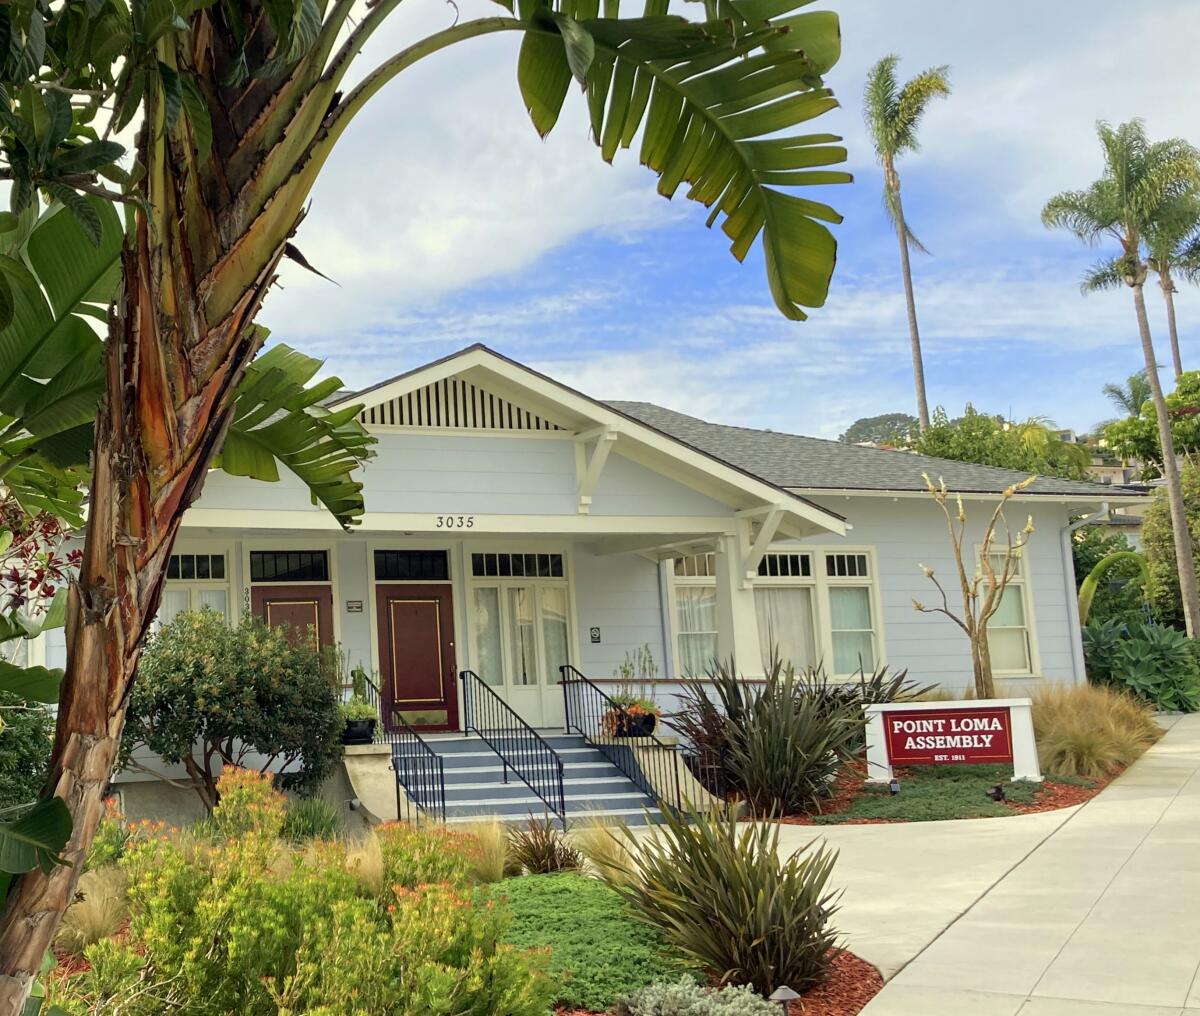 A historical walking tour in Point Loma on Saturday, Sept. 9, will begin at the Point Loma Assembly Hall at 3035 Talbot St.